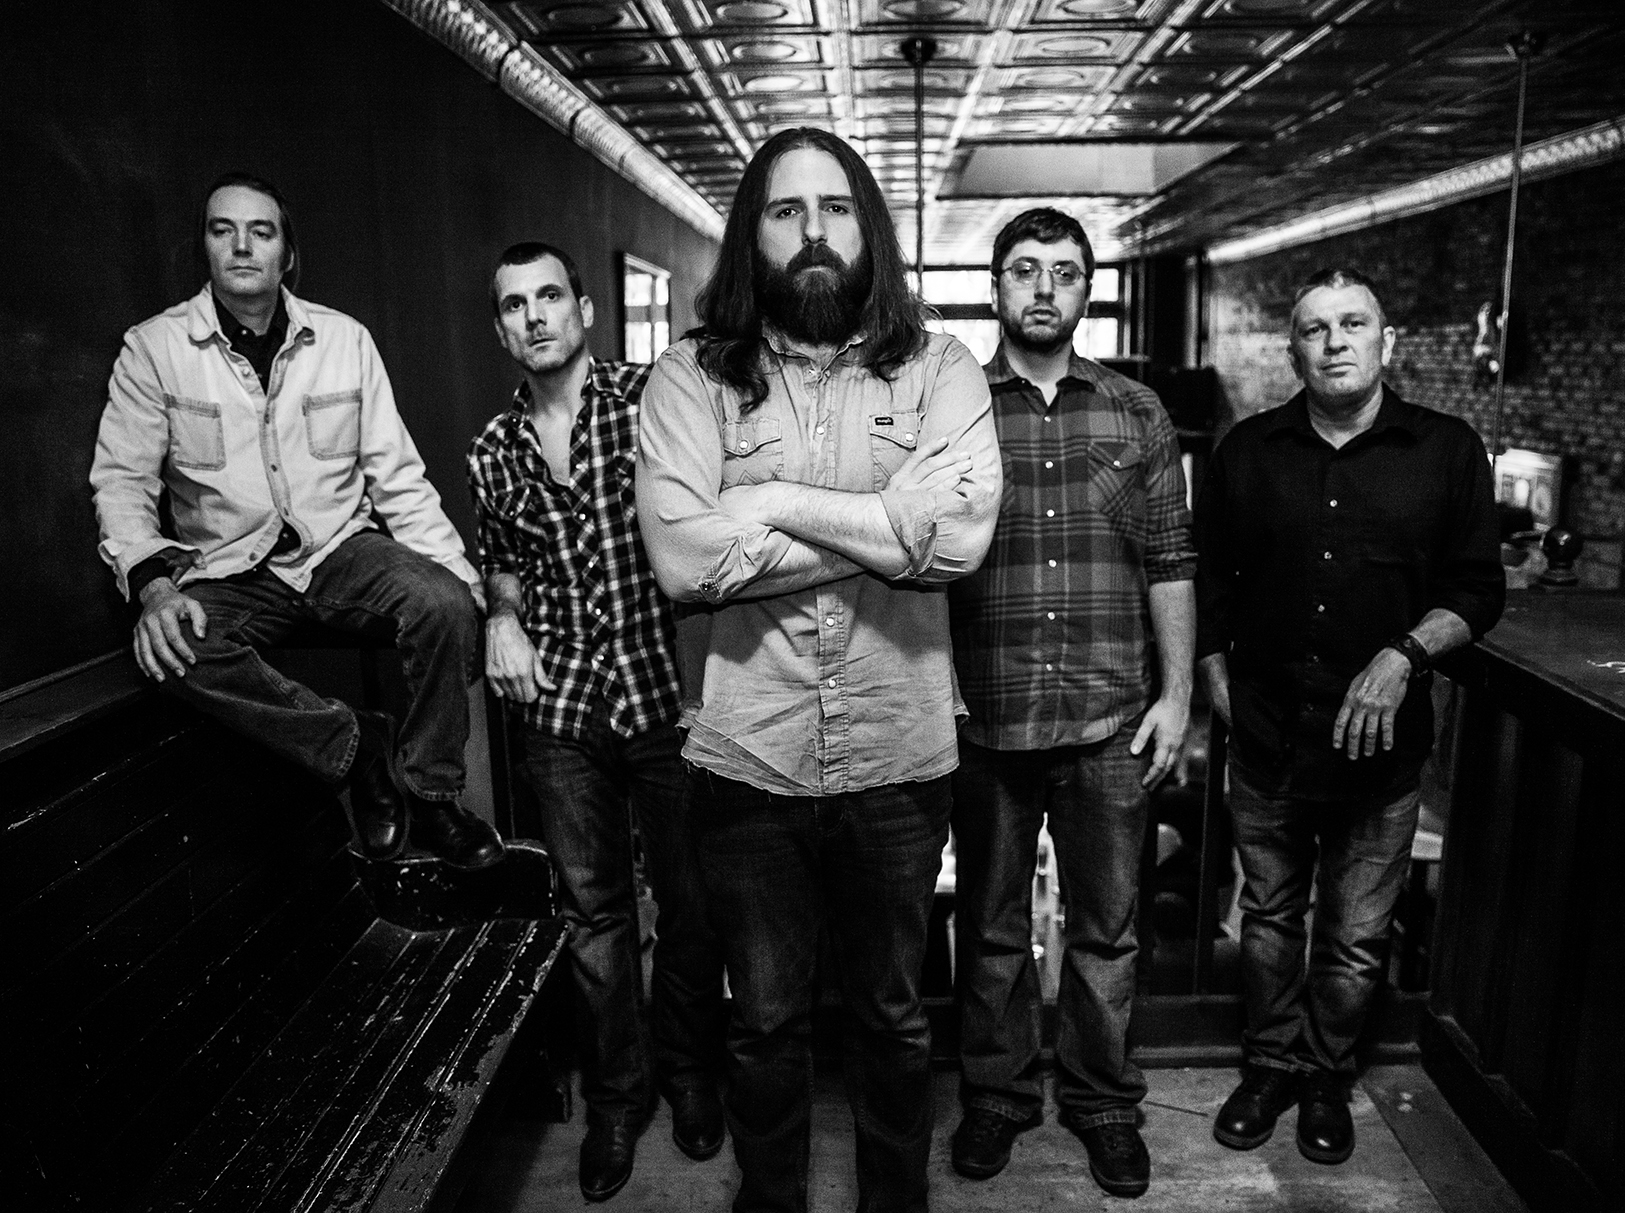 The Kenny George Band